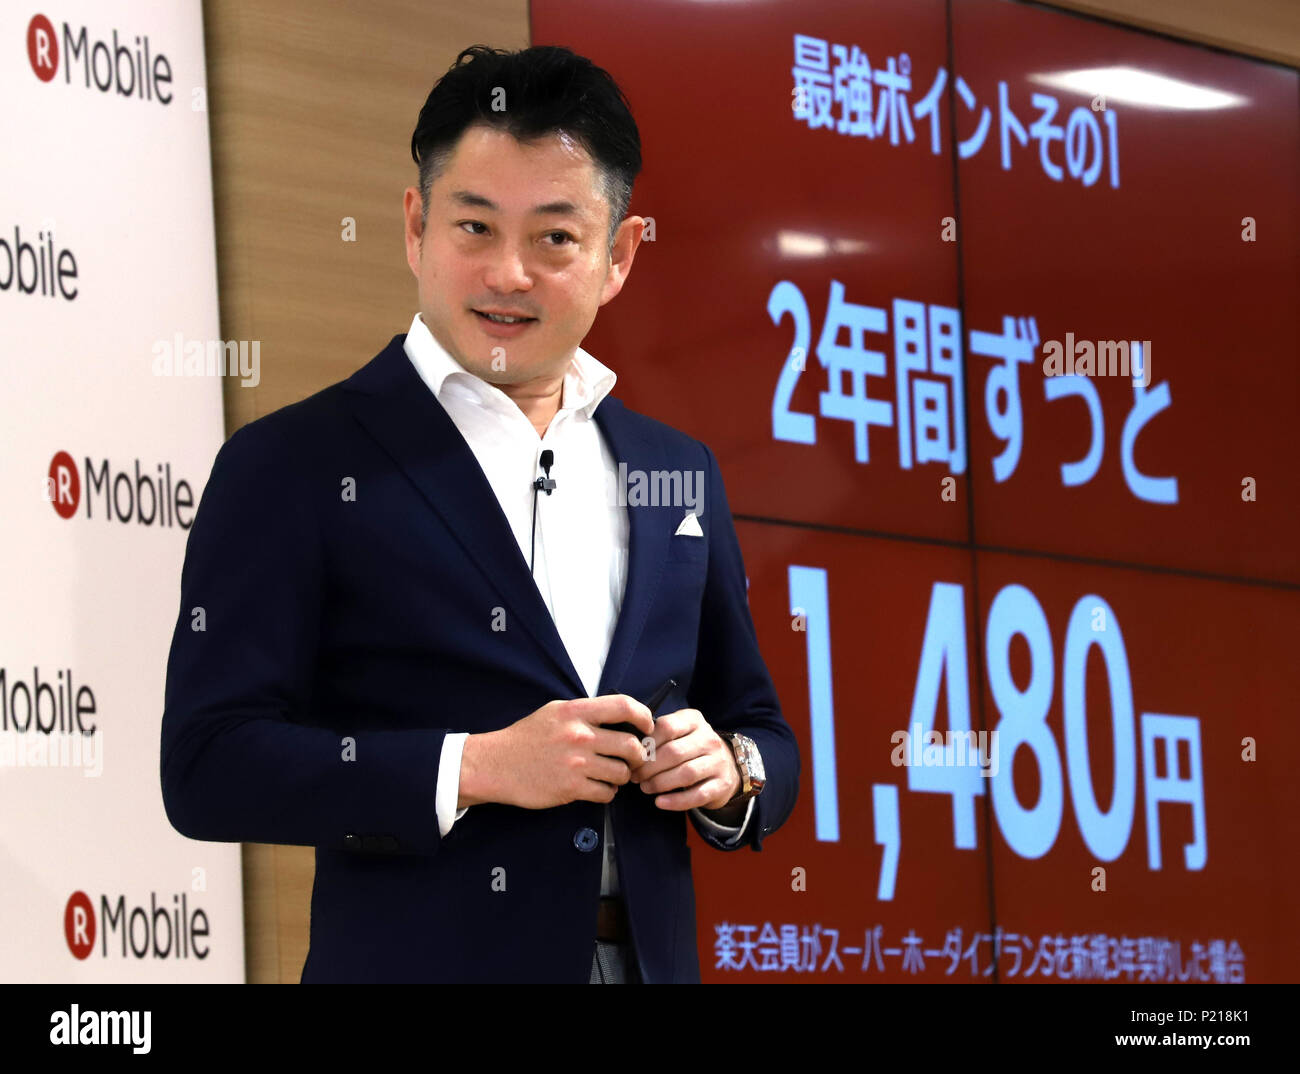 Tokyo, Japan. 14th June, 2018. Japan's online commerce giant Rakuten's mobile business operating manager Hiroto Ooka announces the new price plan for their MVNO service at the Rakuten headquarters in Tokyo on Thursday, June 14, 2018. Credit: Yoshio Tsunoda/AFLO/Alamy Live News Stock Photo